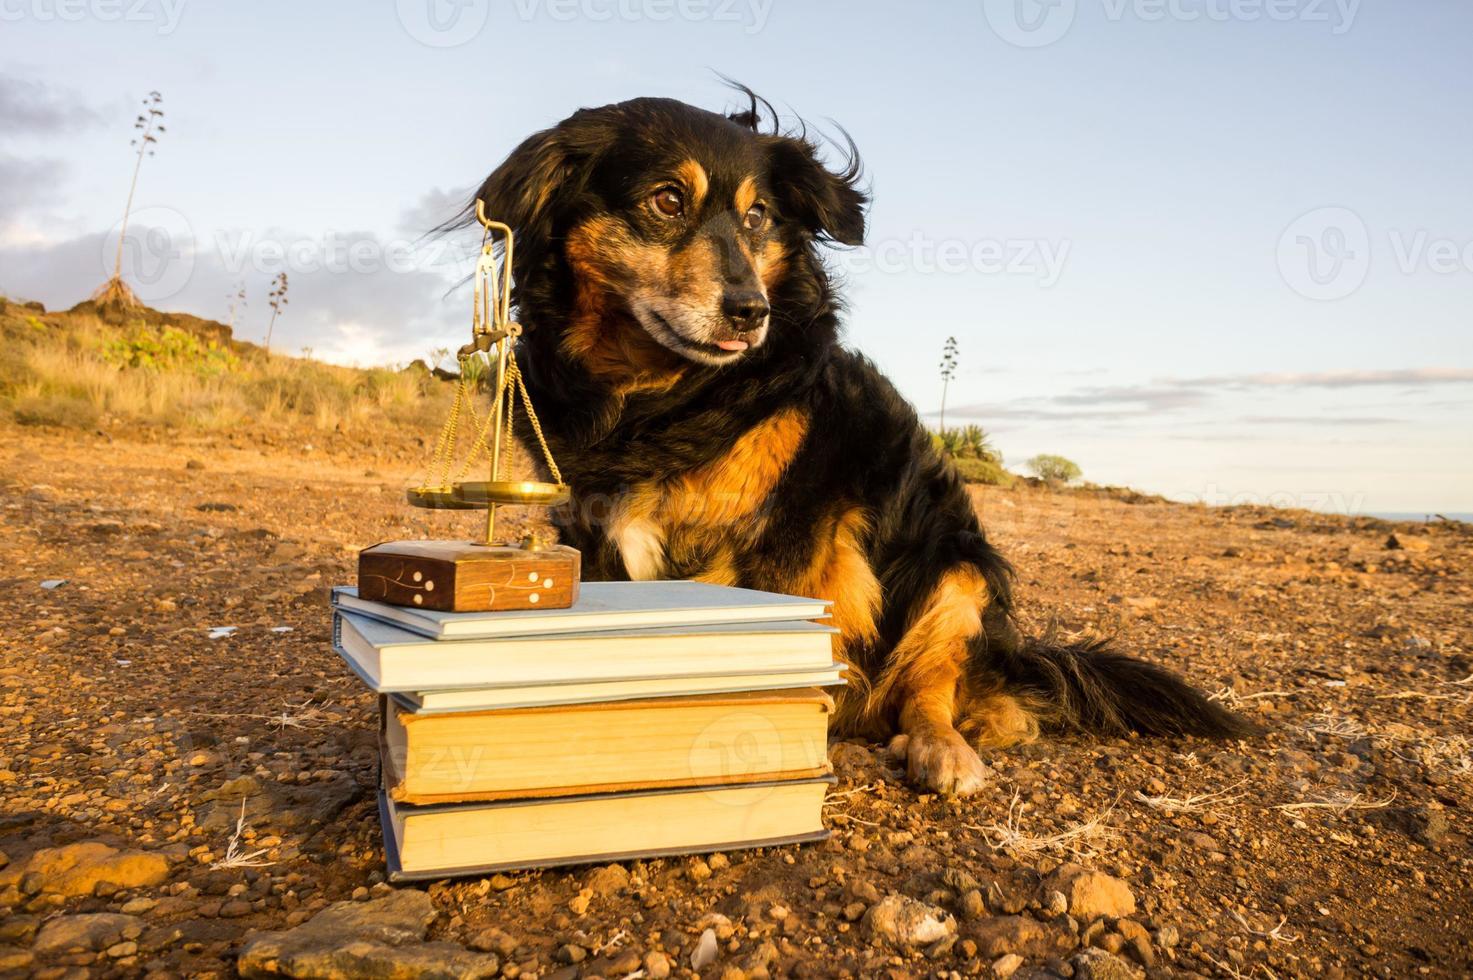 Cute dog outdoors with pile of books photo